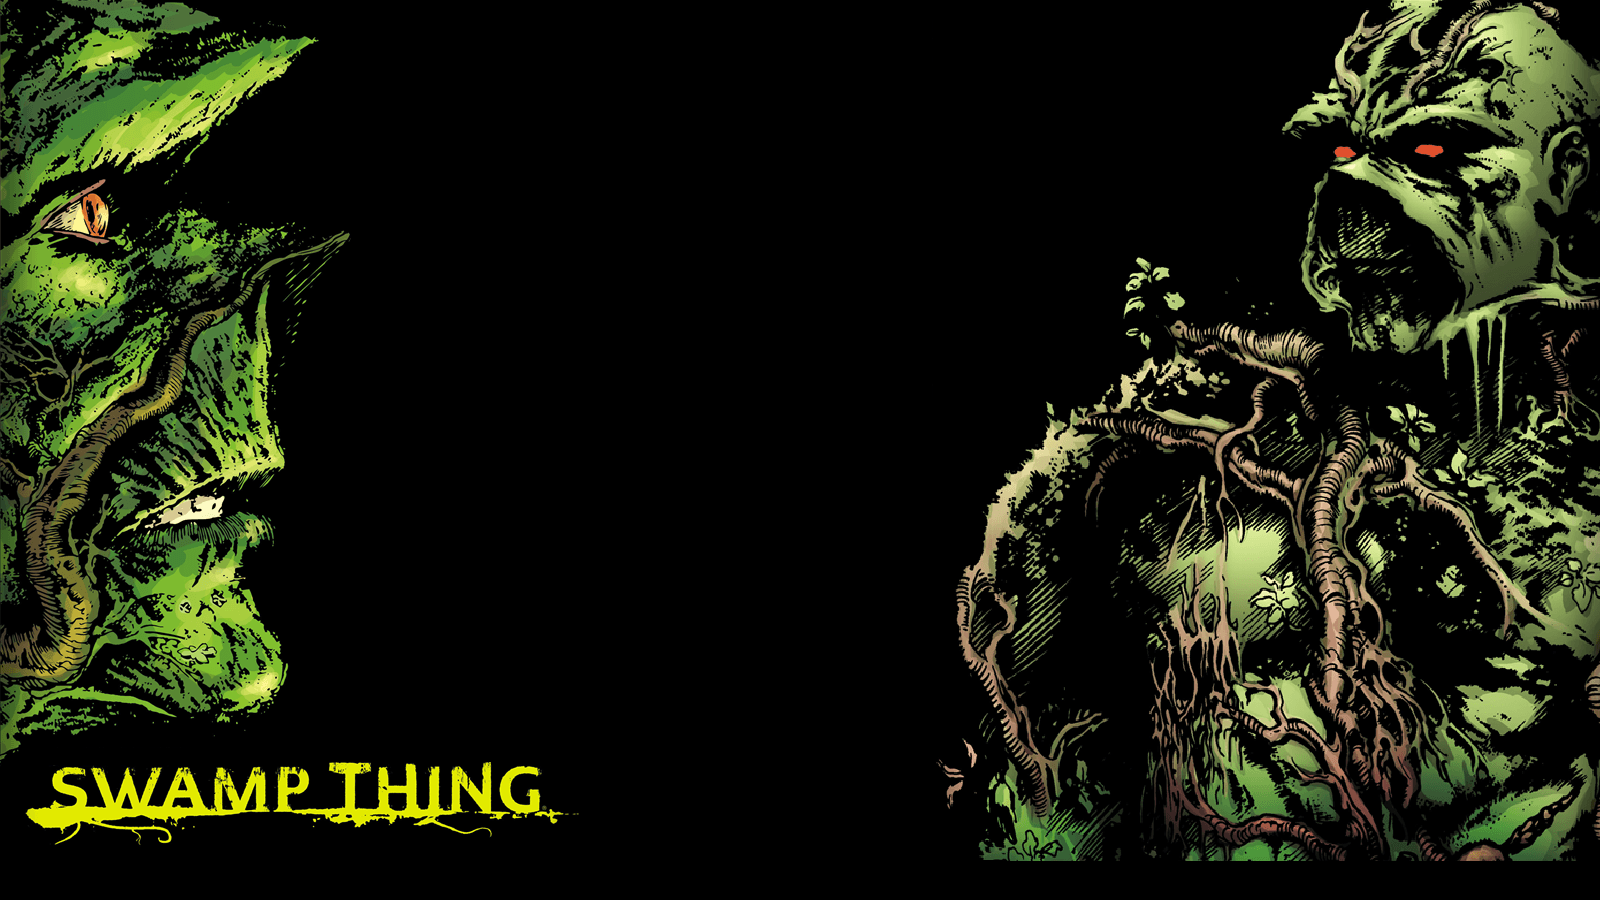 Made a Swamp Thing wallpaper from the covers of the first two Alan